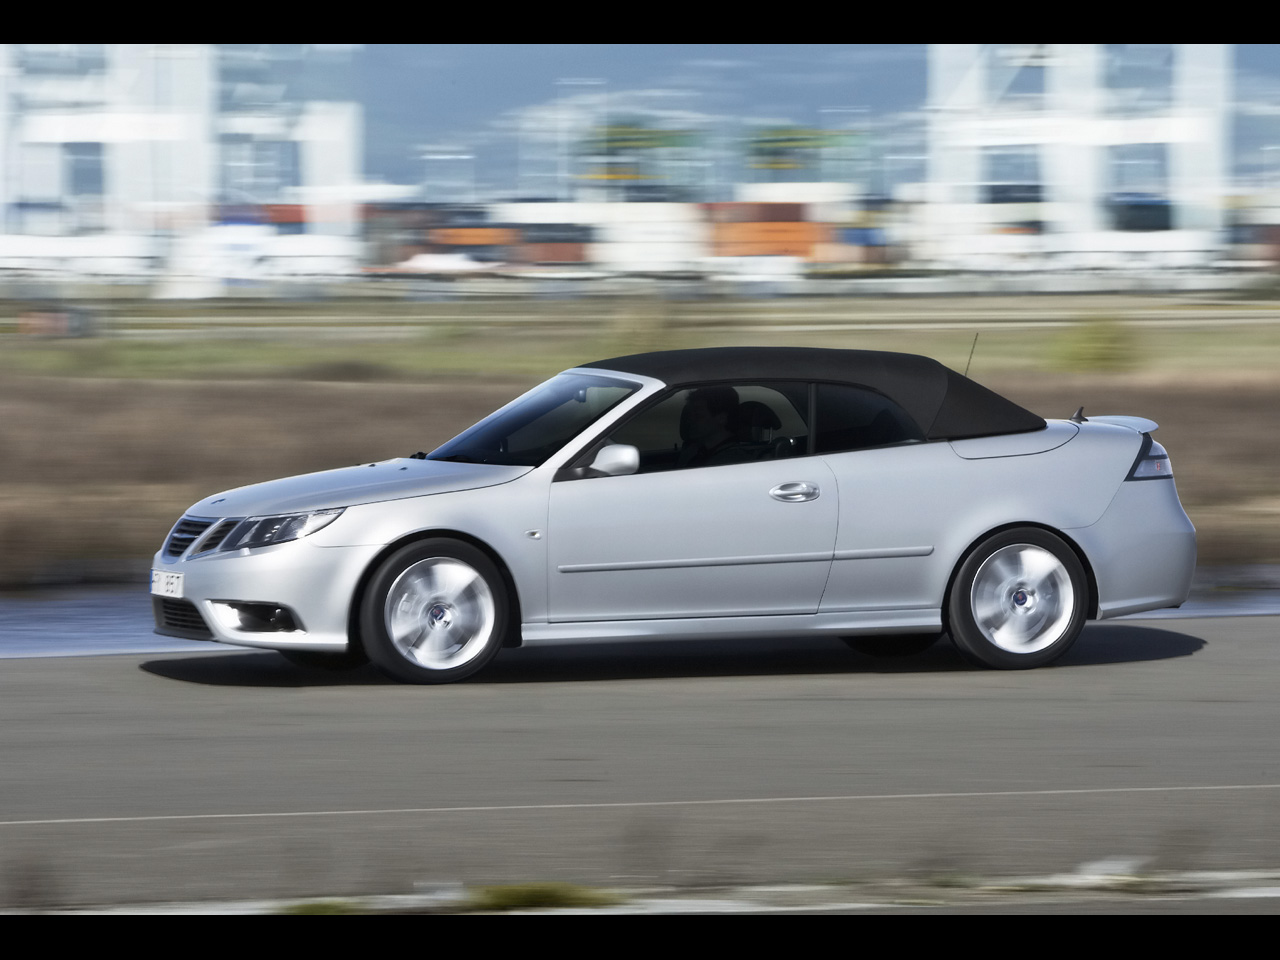 2008 Saab 9-3 Convertible - Side Speed Top Up - 1280x960 - Wallpaper